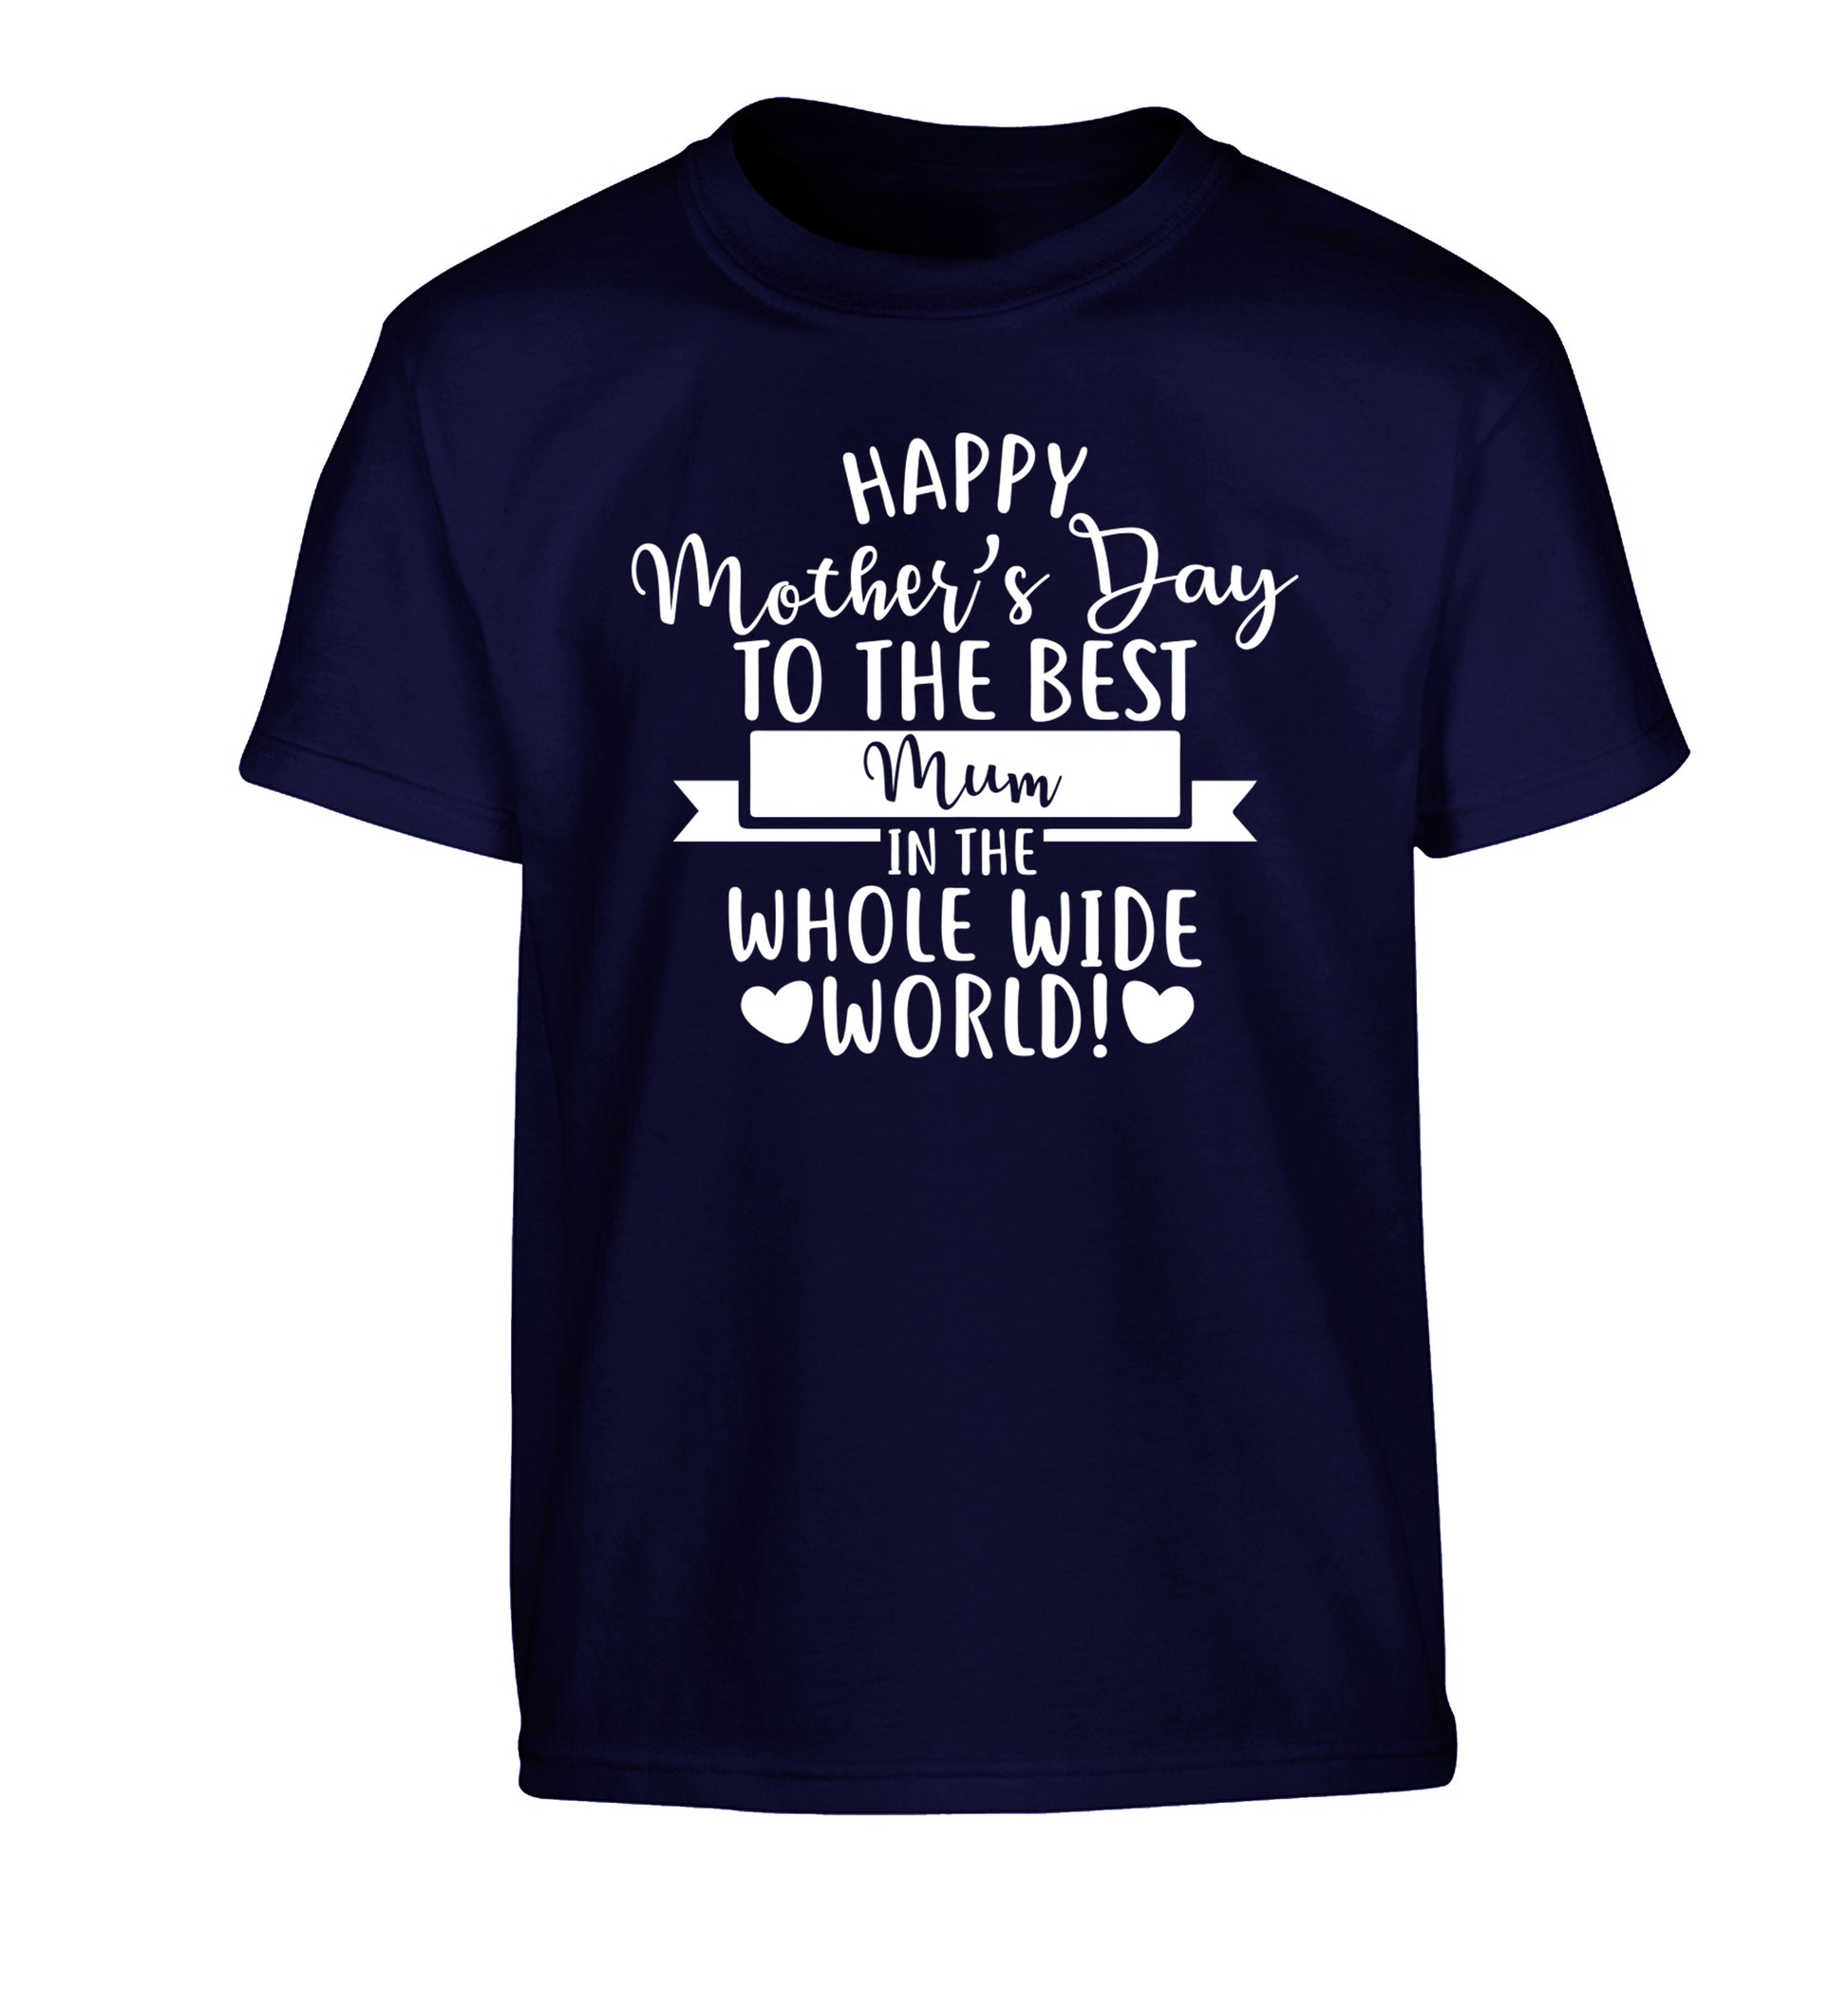 Happy Mother's Day to the best mum in the whole wide world! Children's navy Tshirt 12-13 Years